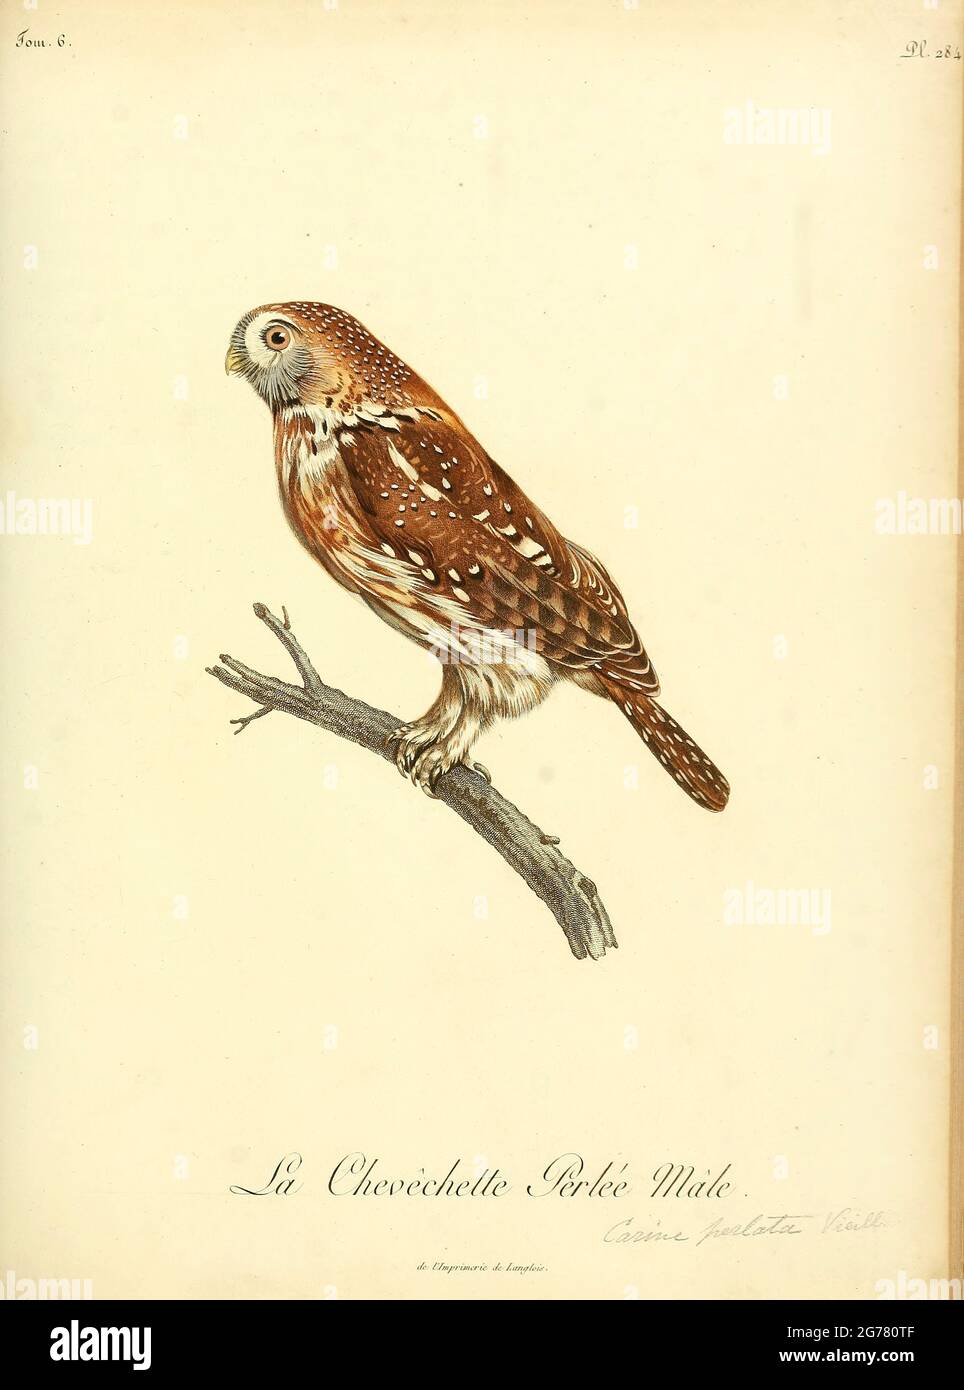 Chevêchette perlée, Glaucidium perlatum - Pearl-spotted Owlet This small owl inhabits open woodland and scrubland in sub-Saharan Africa. It reaches a length of less than 20 centimetres and so is often termed an owlet. from the Book Histoire naturelle des oiseaux d'Afrique [Natural History of birds of Africa] Volume 6, by Le Vaillant, Francois, 1753-1824; Publish in Paris by Chez J.J. Fuchs, libraire 1808 Stock Photo